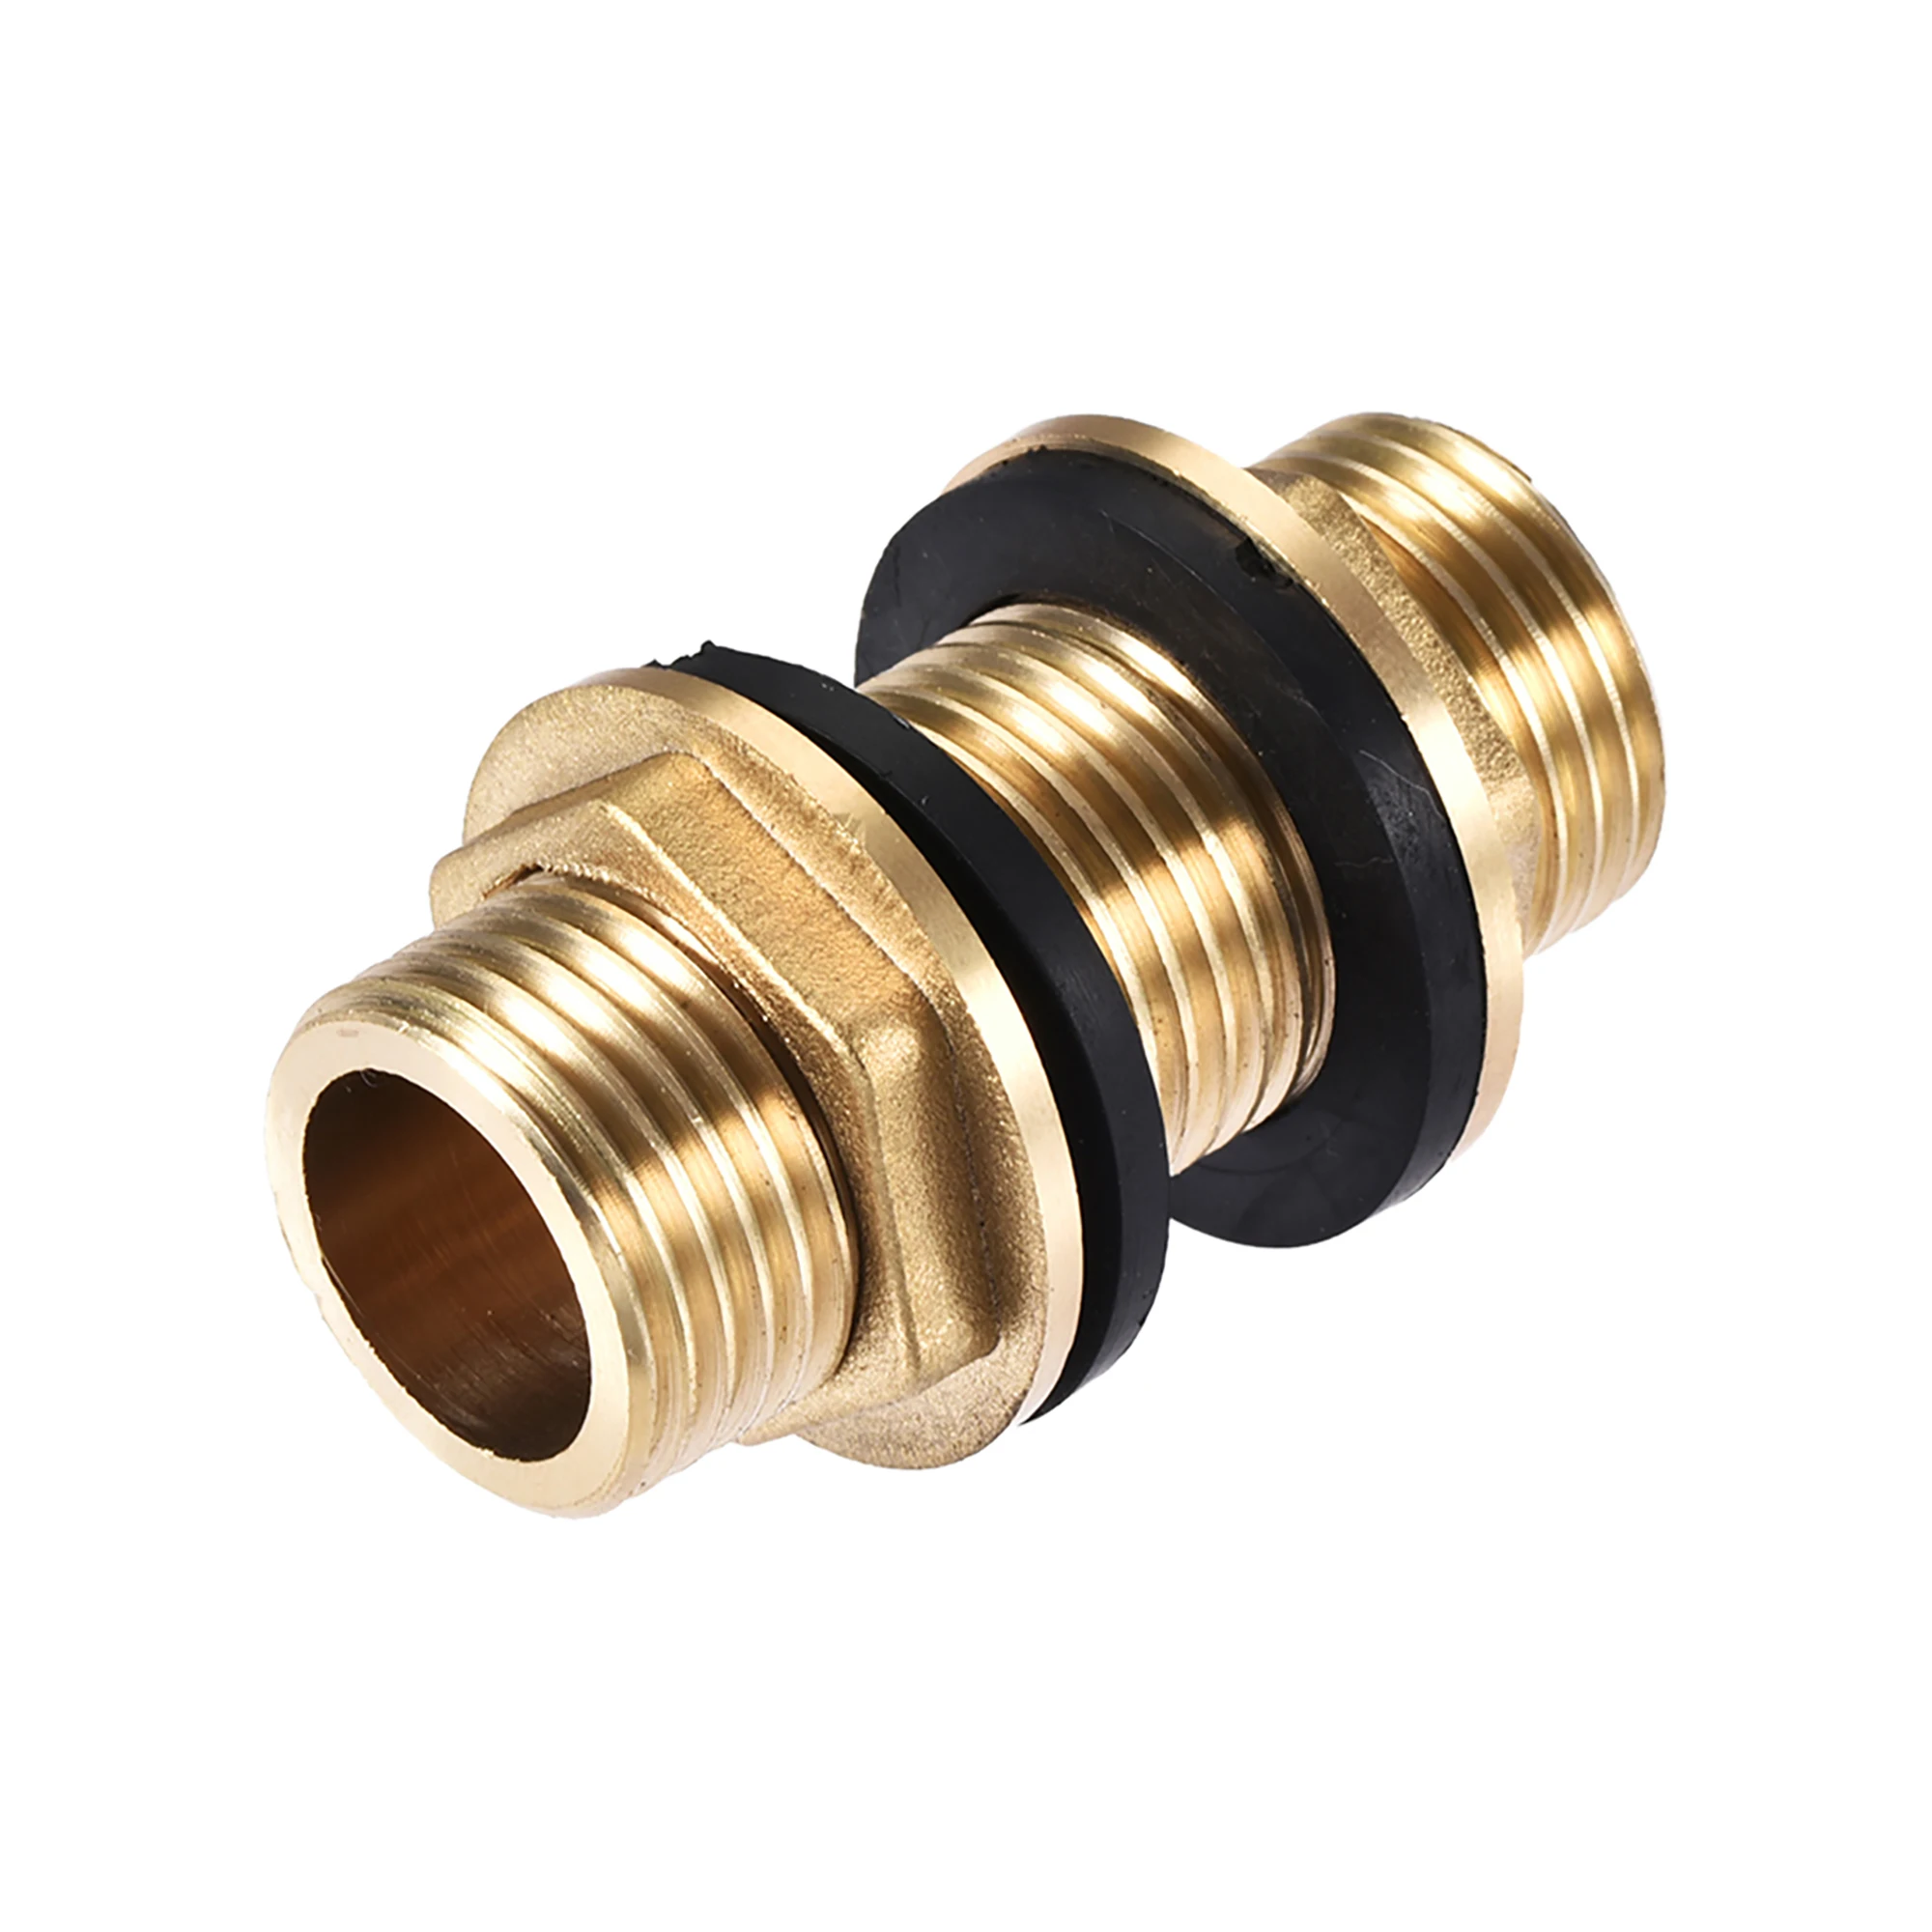 3/8 Inch Female 1/2 Inch Male Soild Brass Water Tank Connector Threaded,Bulkhead Fitting with 2 Rubber Ring 